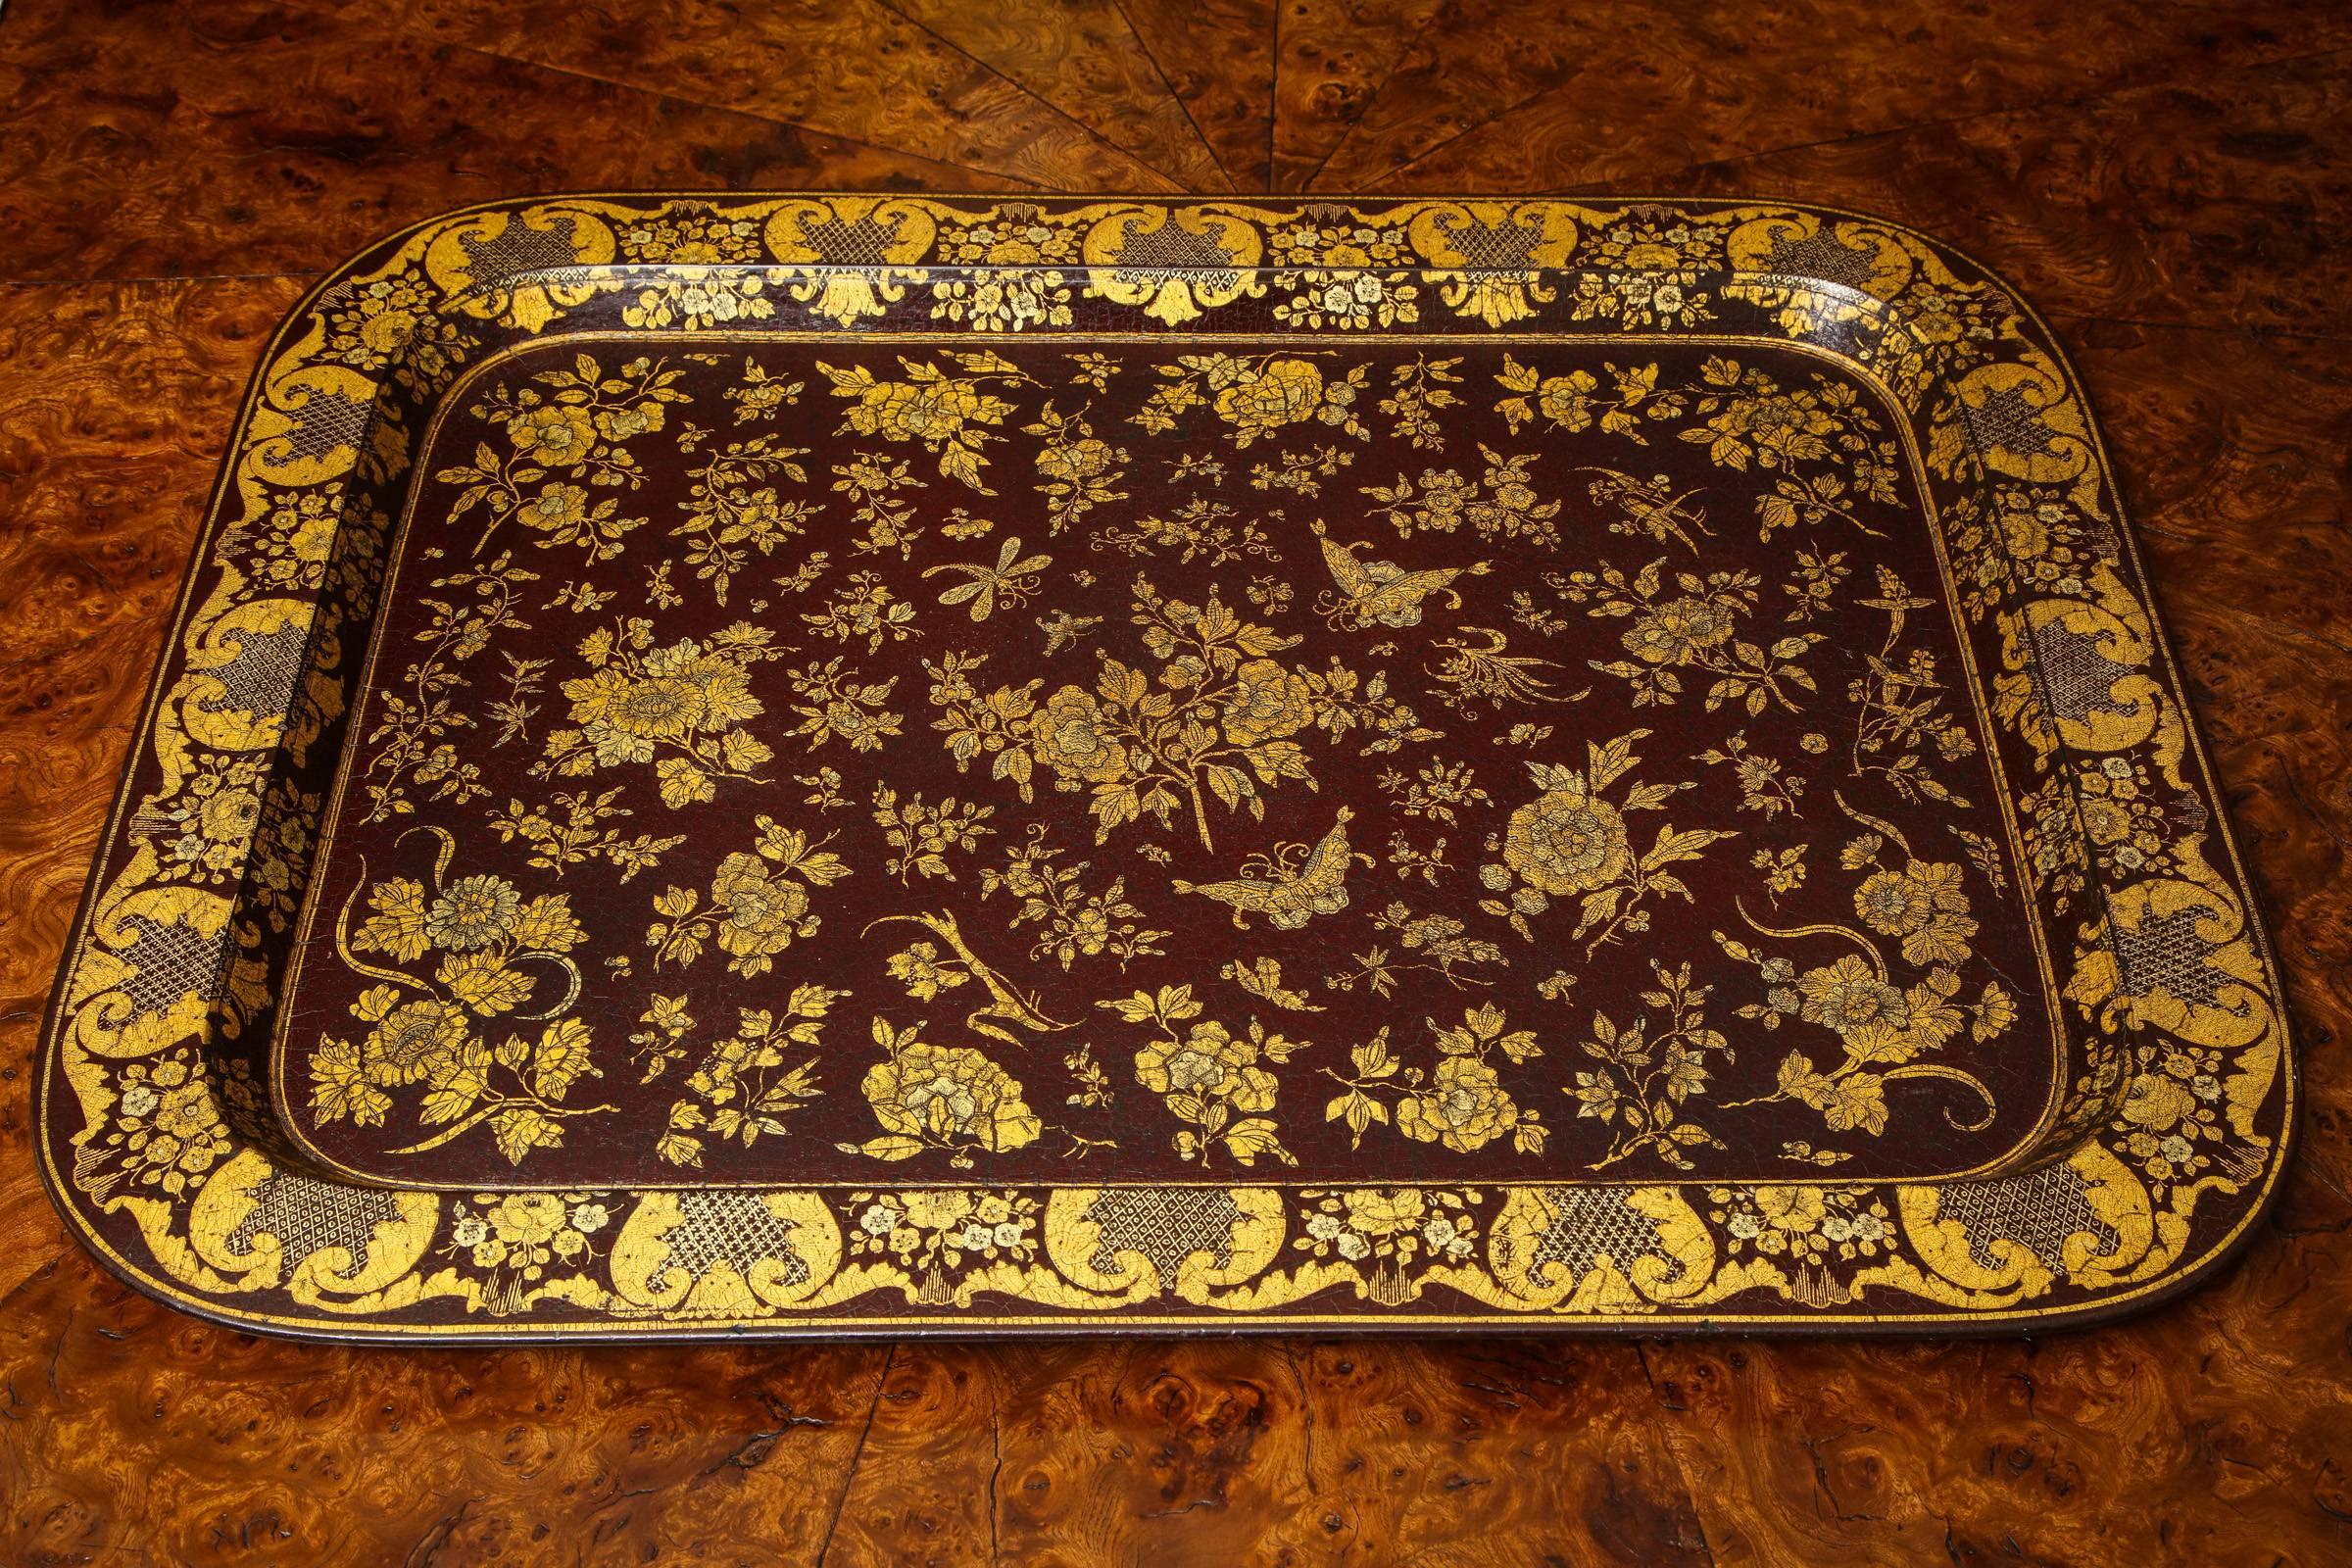 Fine large Regency wine colored papier mâché rectangular dished tray, decorated with butterflies, flora and fauna in gold and silver, English, circa 1830. This tray can be mounted as a tray table at our cost.

Measures: Height 1